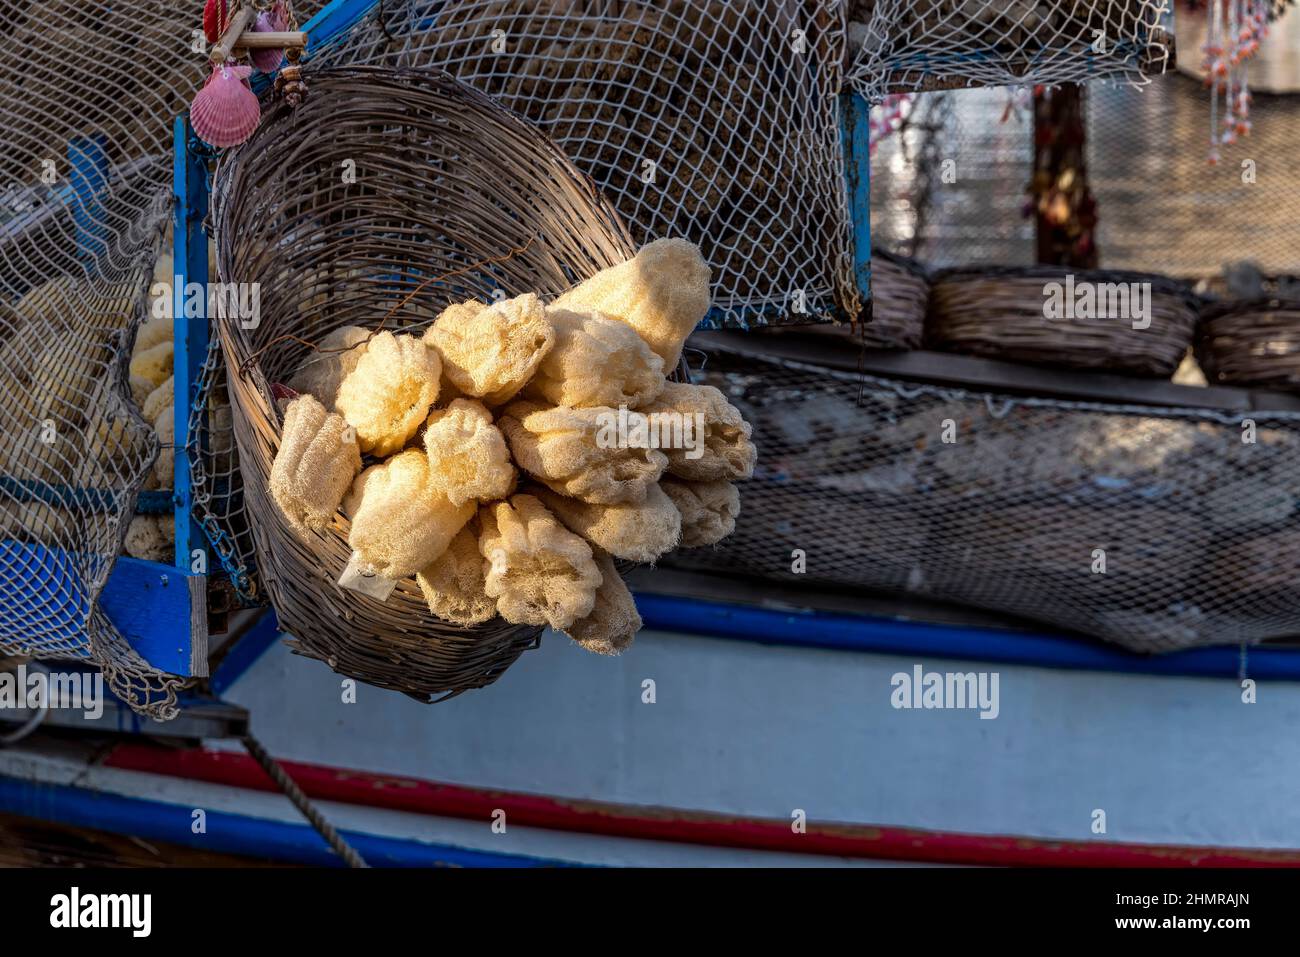 Boat with baskets of sponge gourd Stock Photo